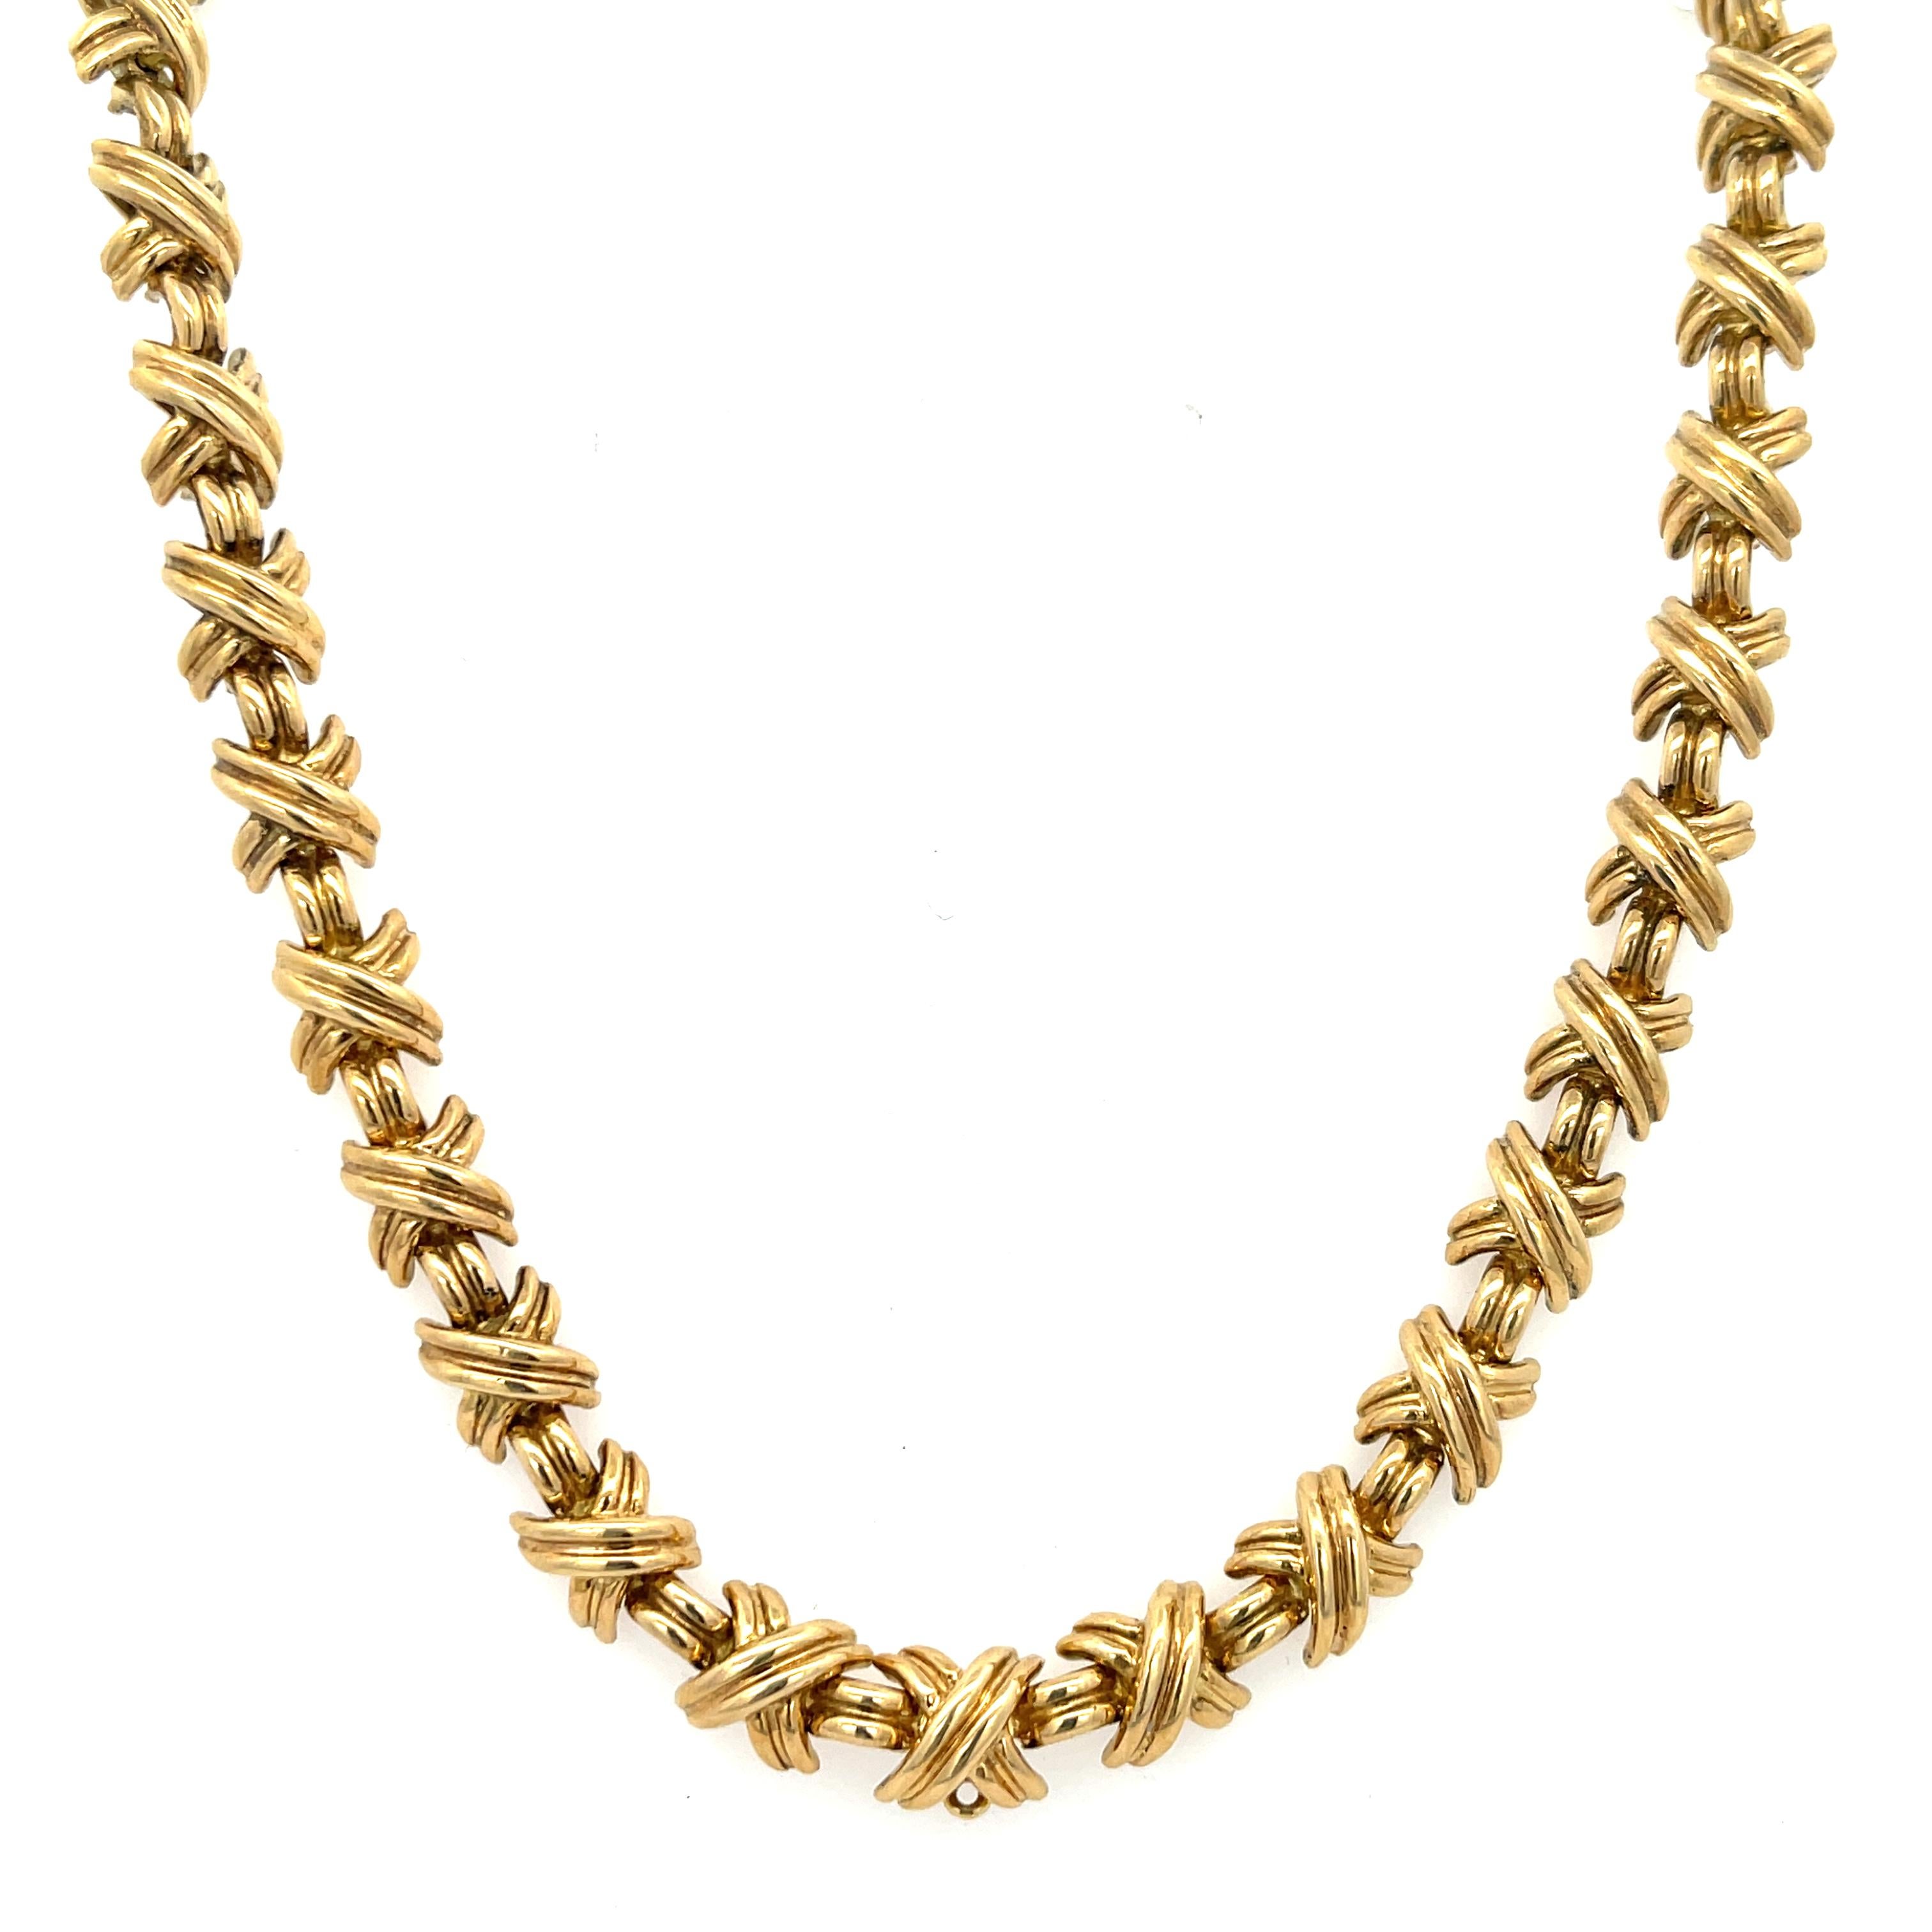 Estate Tiffany & Co. Small X Signature Collection Necklace in 18K Yellow Gold. The necklace is 16 5/8 inches long,  1/4 inches wide, and weighs 70.80 grams. The necklace features a hidden claps with safety latch. Singed T&CO 750.